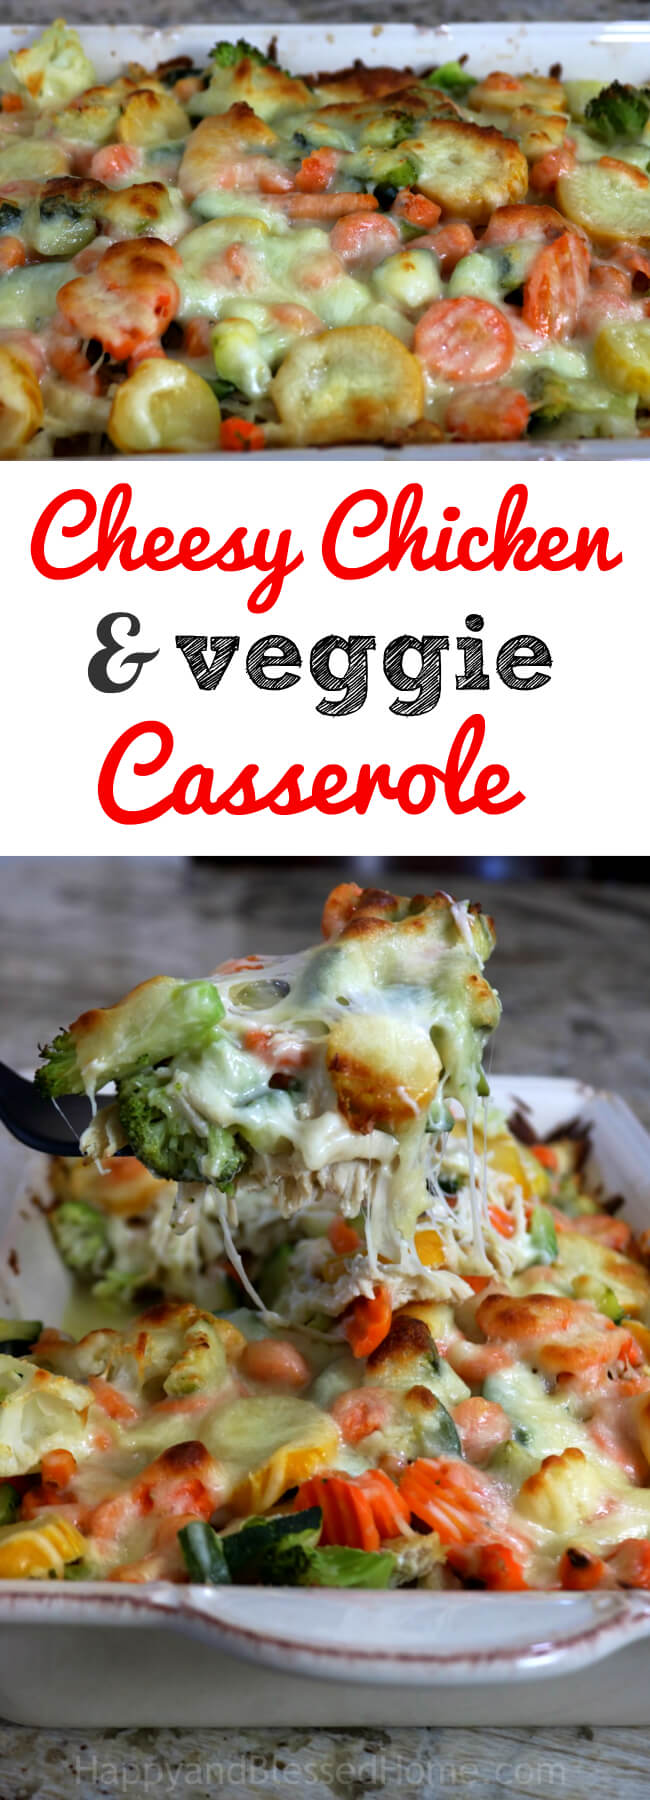 Tasty and Easy Recipe for Cheesy Chicken and Vegetable Casserole